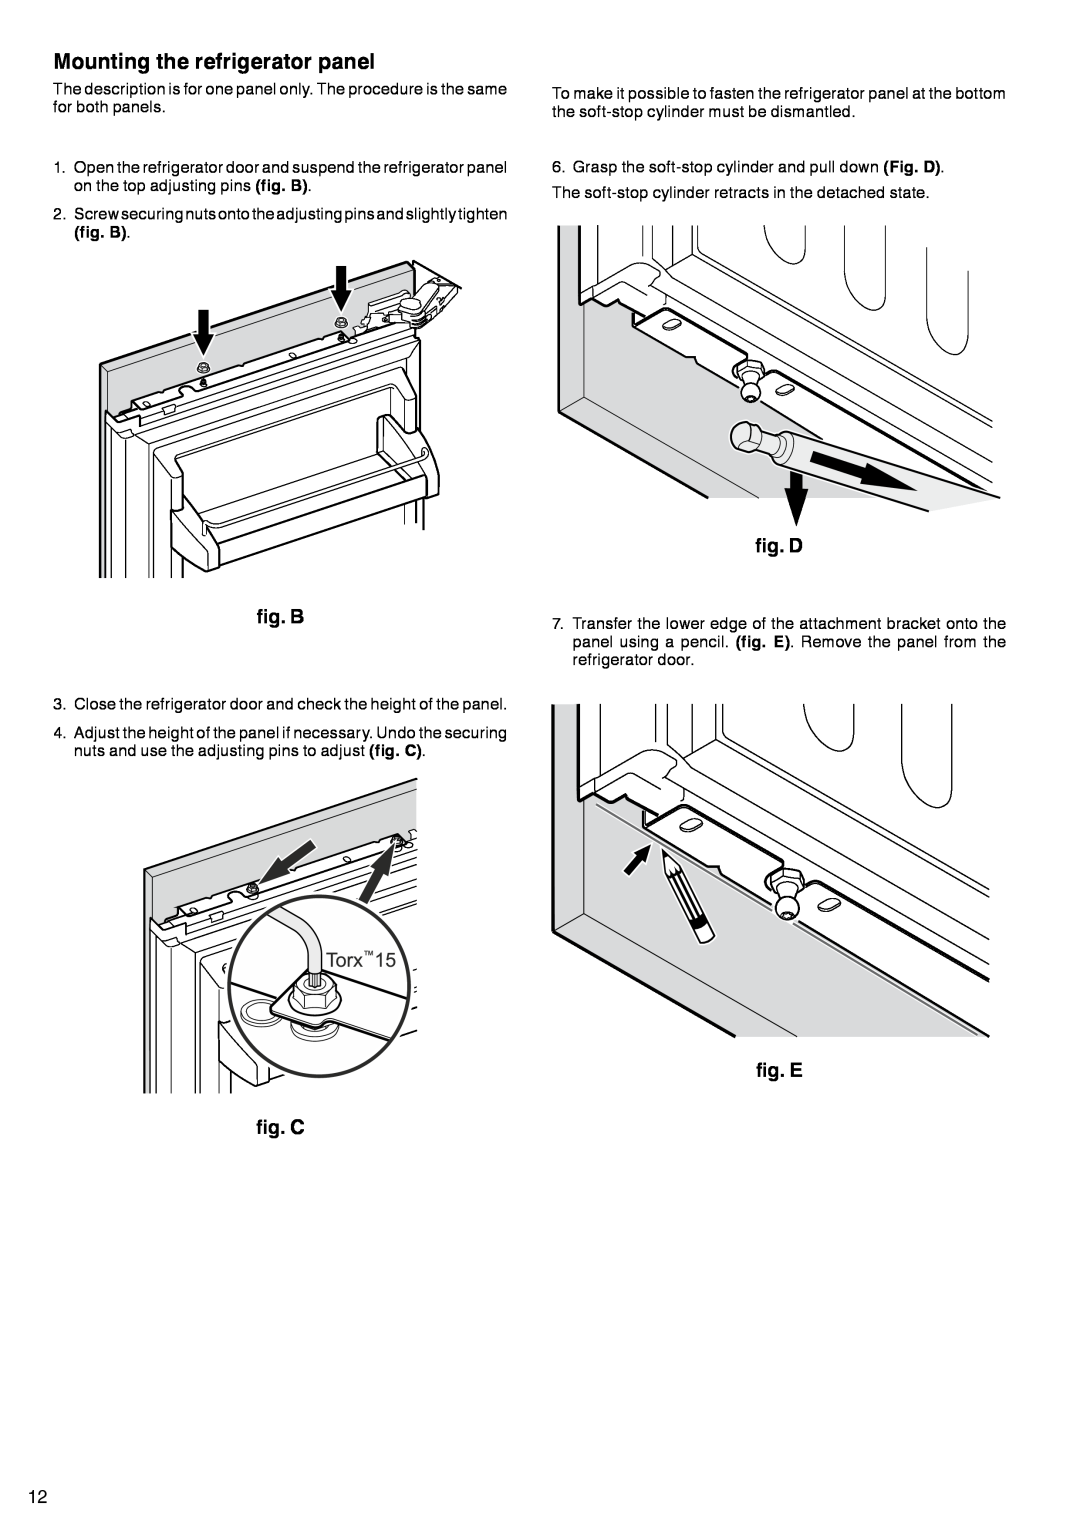 Liebherr 7083-103-00 installation instructions Mounting the refrigerator panel, fig. D, fig. B, fig. C, fig. E 